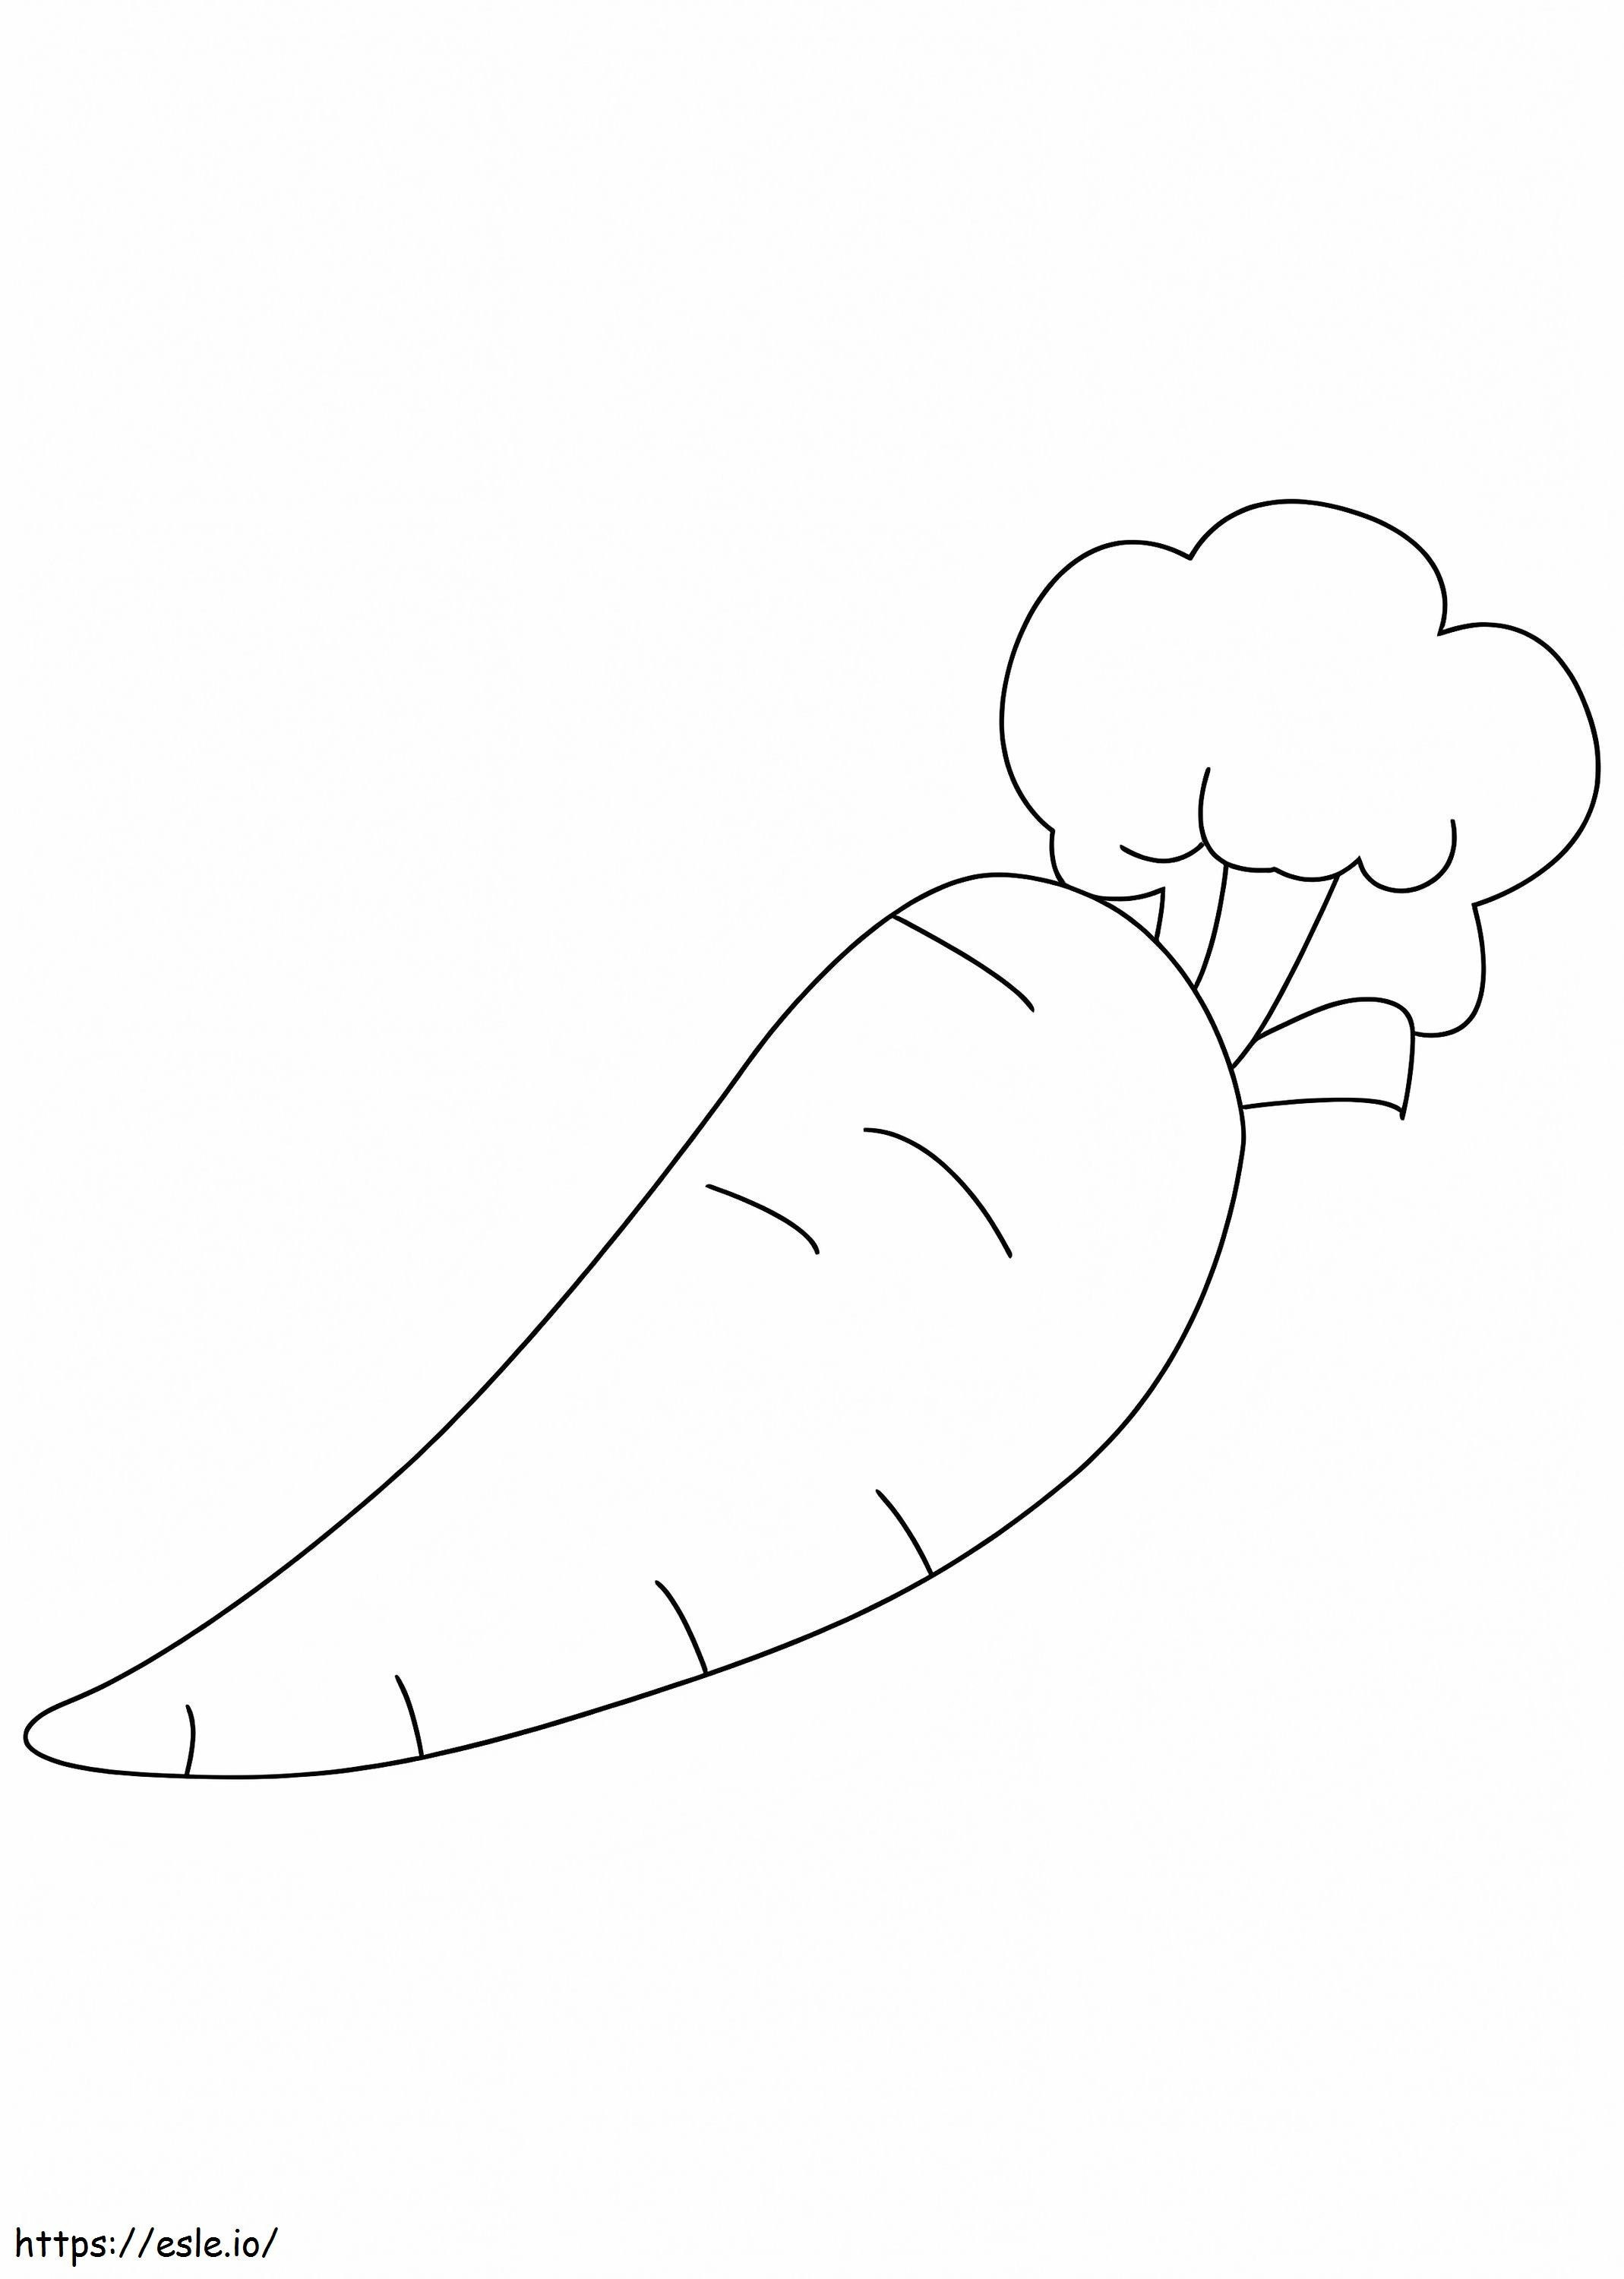 Printable Carrot coloring page